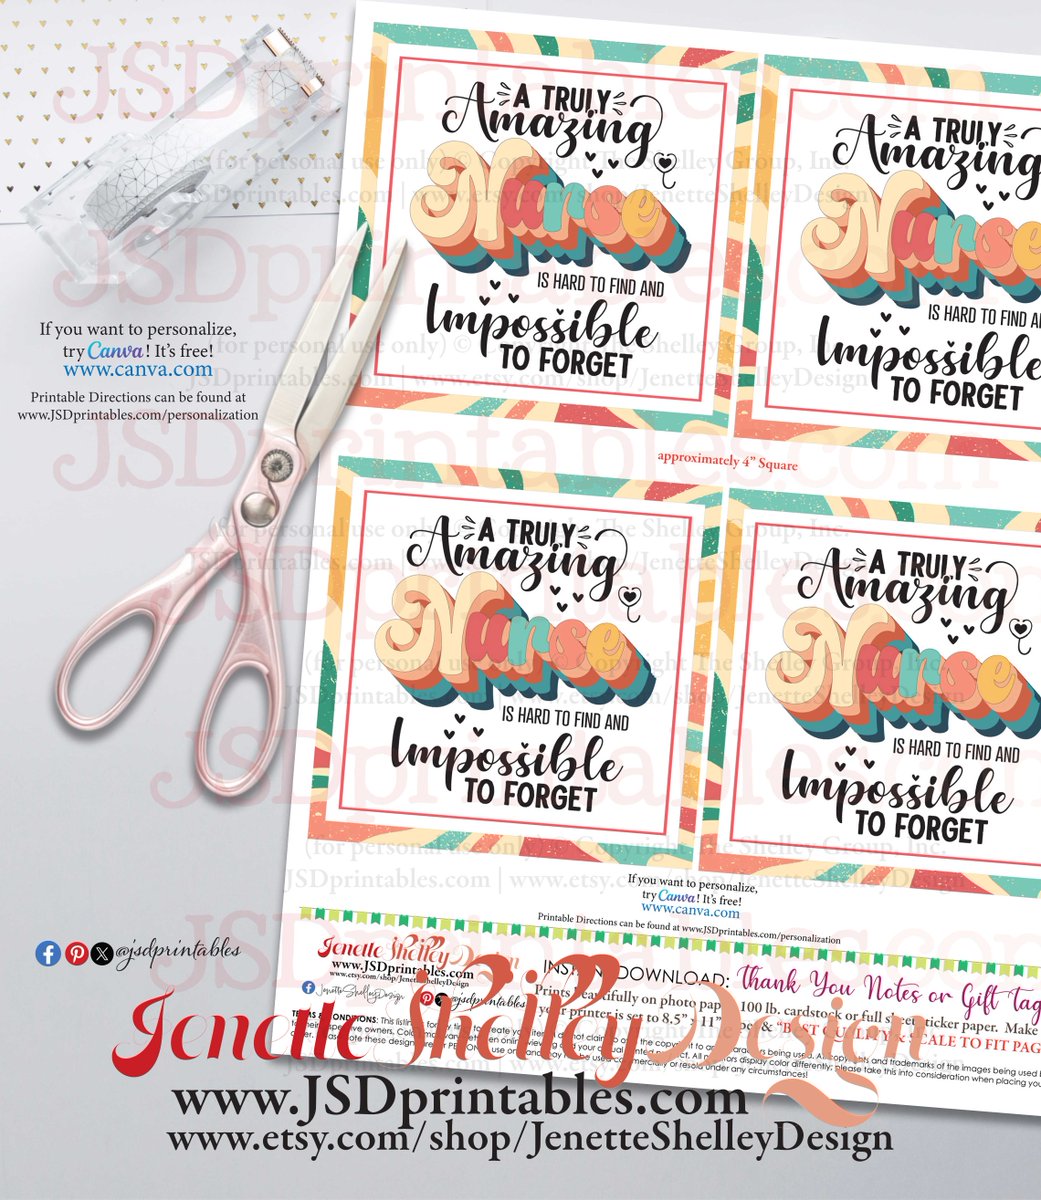 jsdprintables.com/product-page/a… An Amazing Nurse Is Hard To Find *Printable Digital Gift Tags* @jsdprintables #printables #shopsmall #gifts #gifttags #instantdownload #nurselife #nursesday #thankanurse